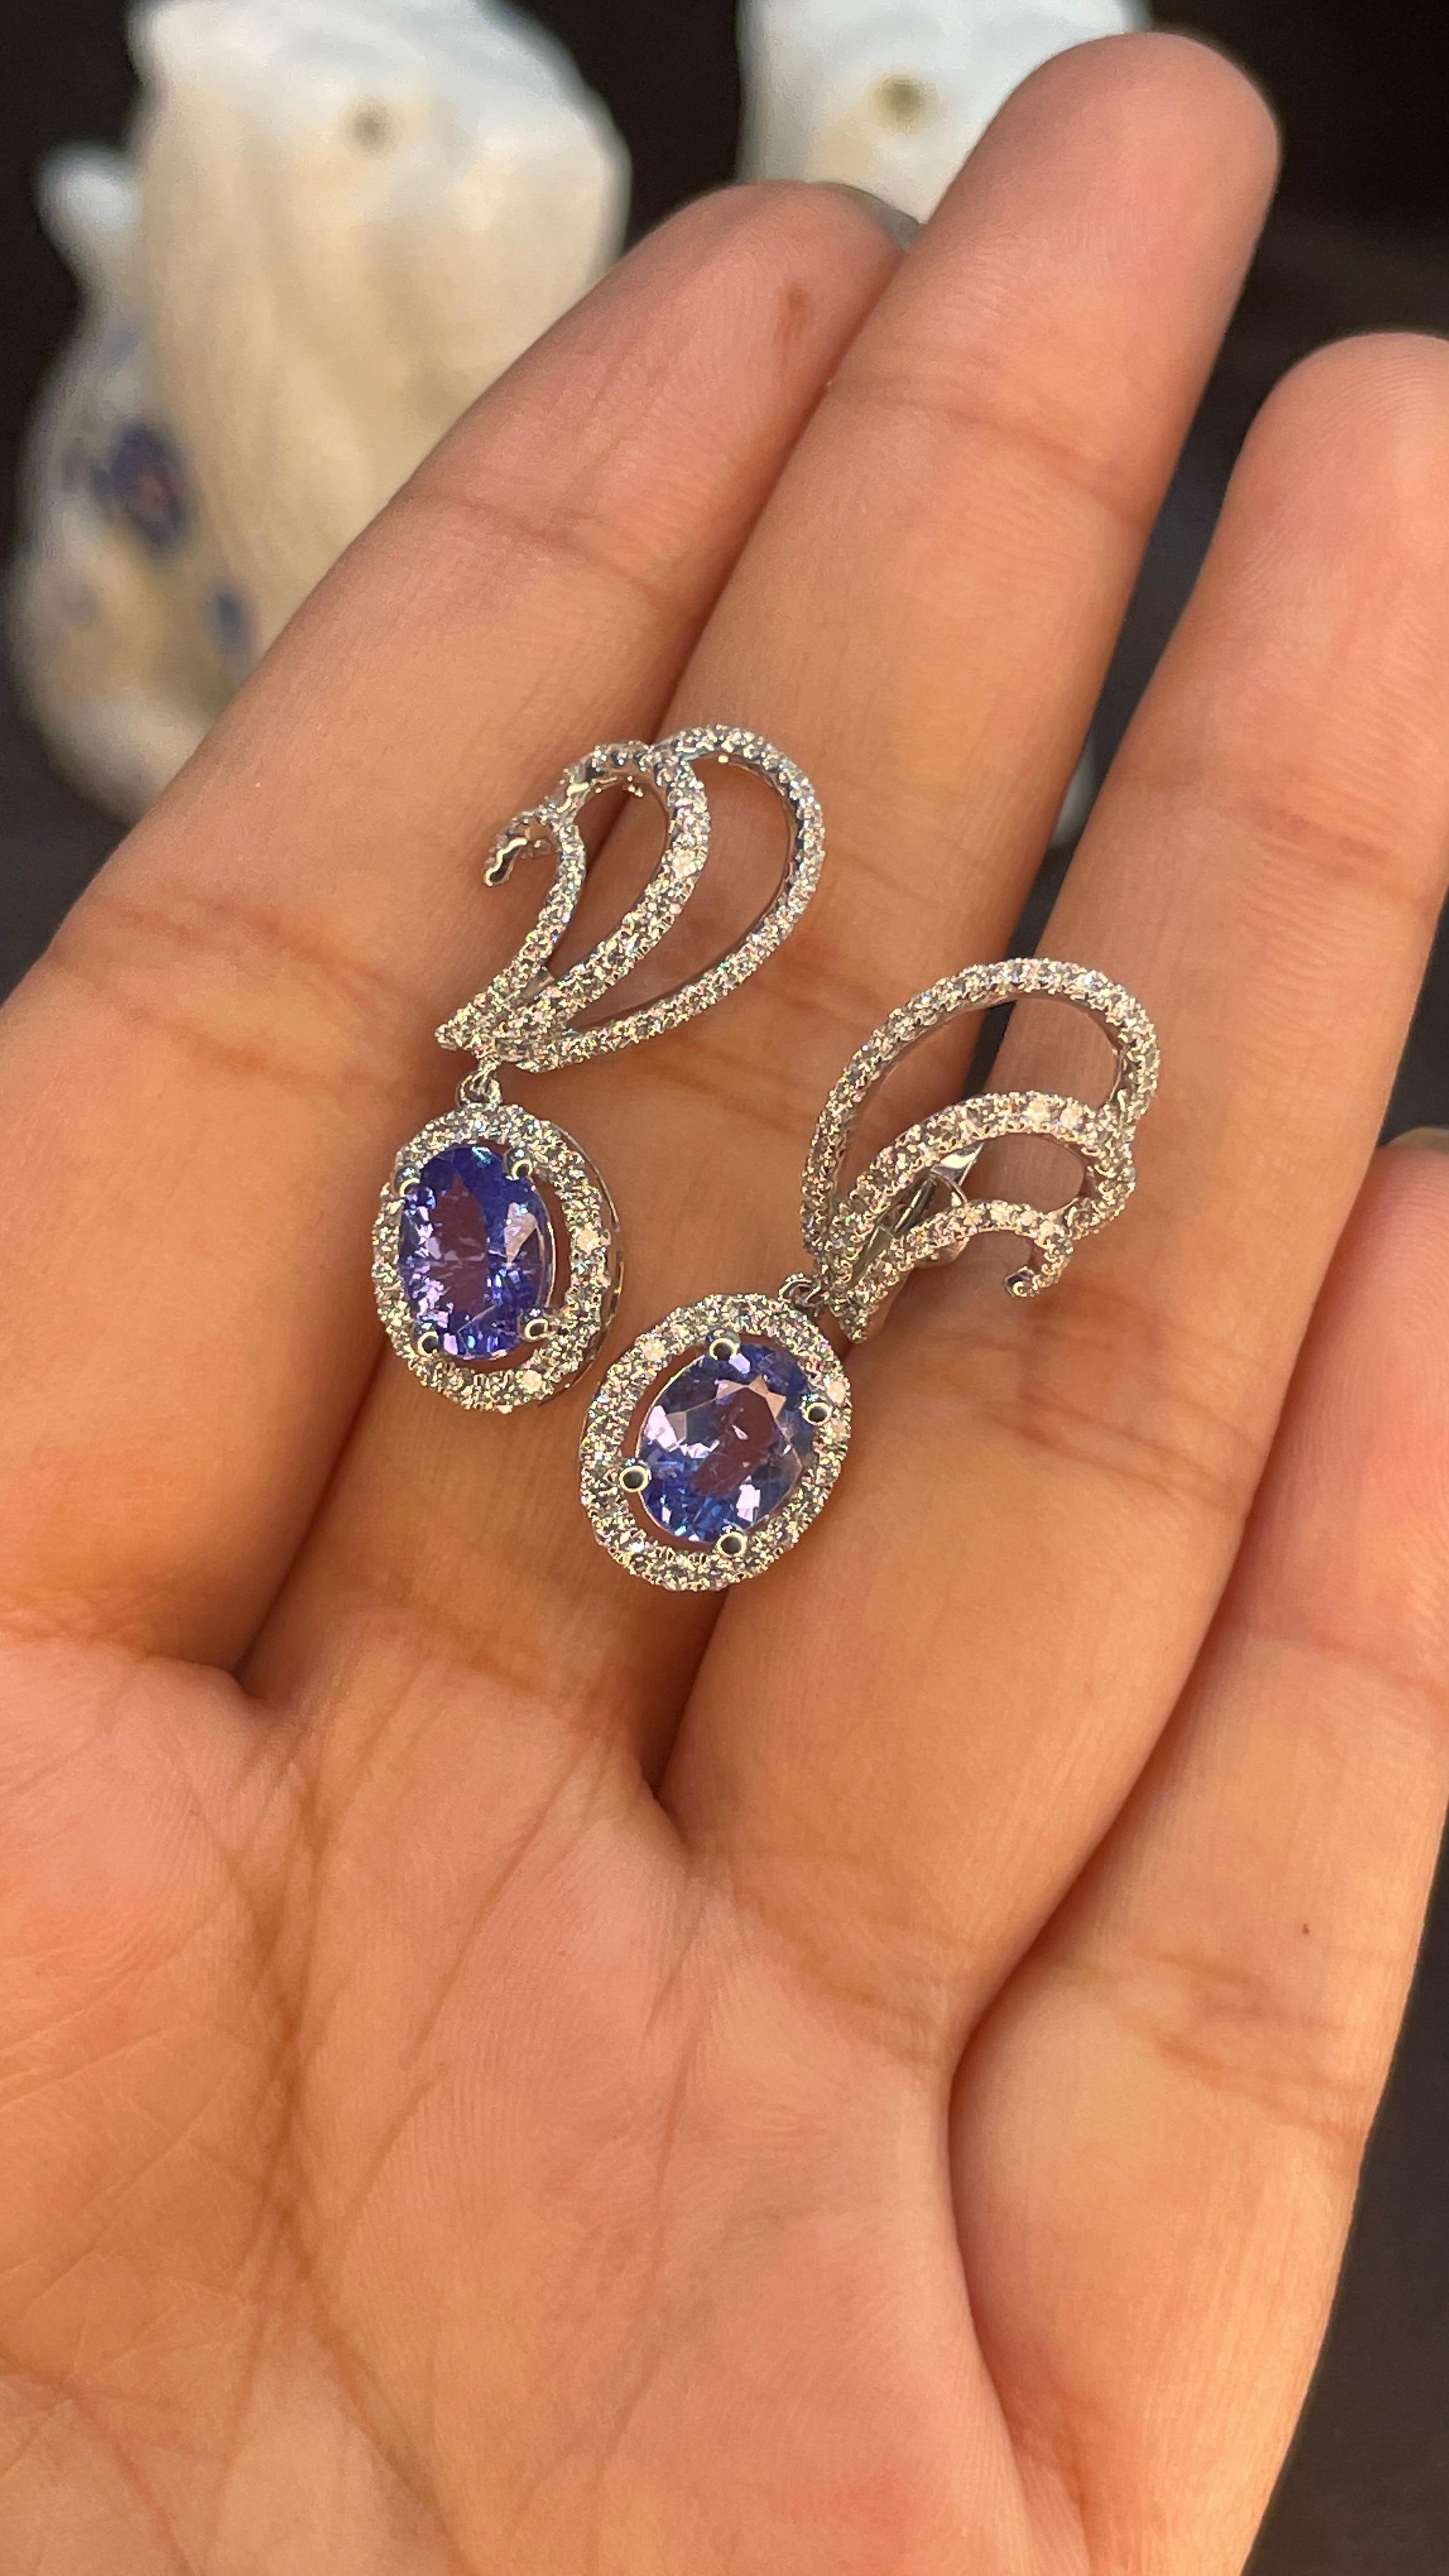 Earrings create a subtle beauty while showcasing the colors of the natural precious gemstones and illuminating diamonds making a statement.

Oval cut tanzanite earrings in 14K gold. Embrace your look with these stunning pair of earrings suitable for